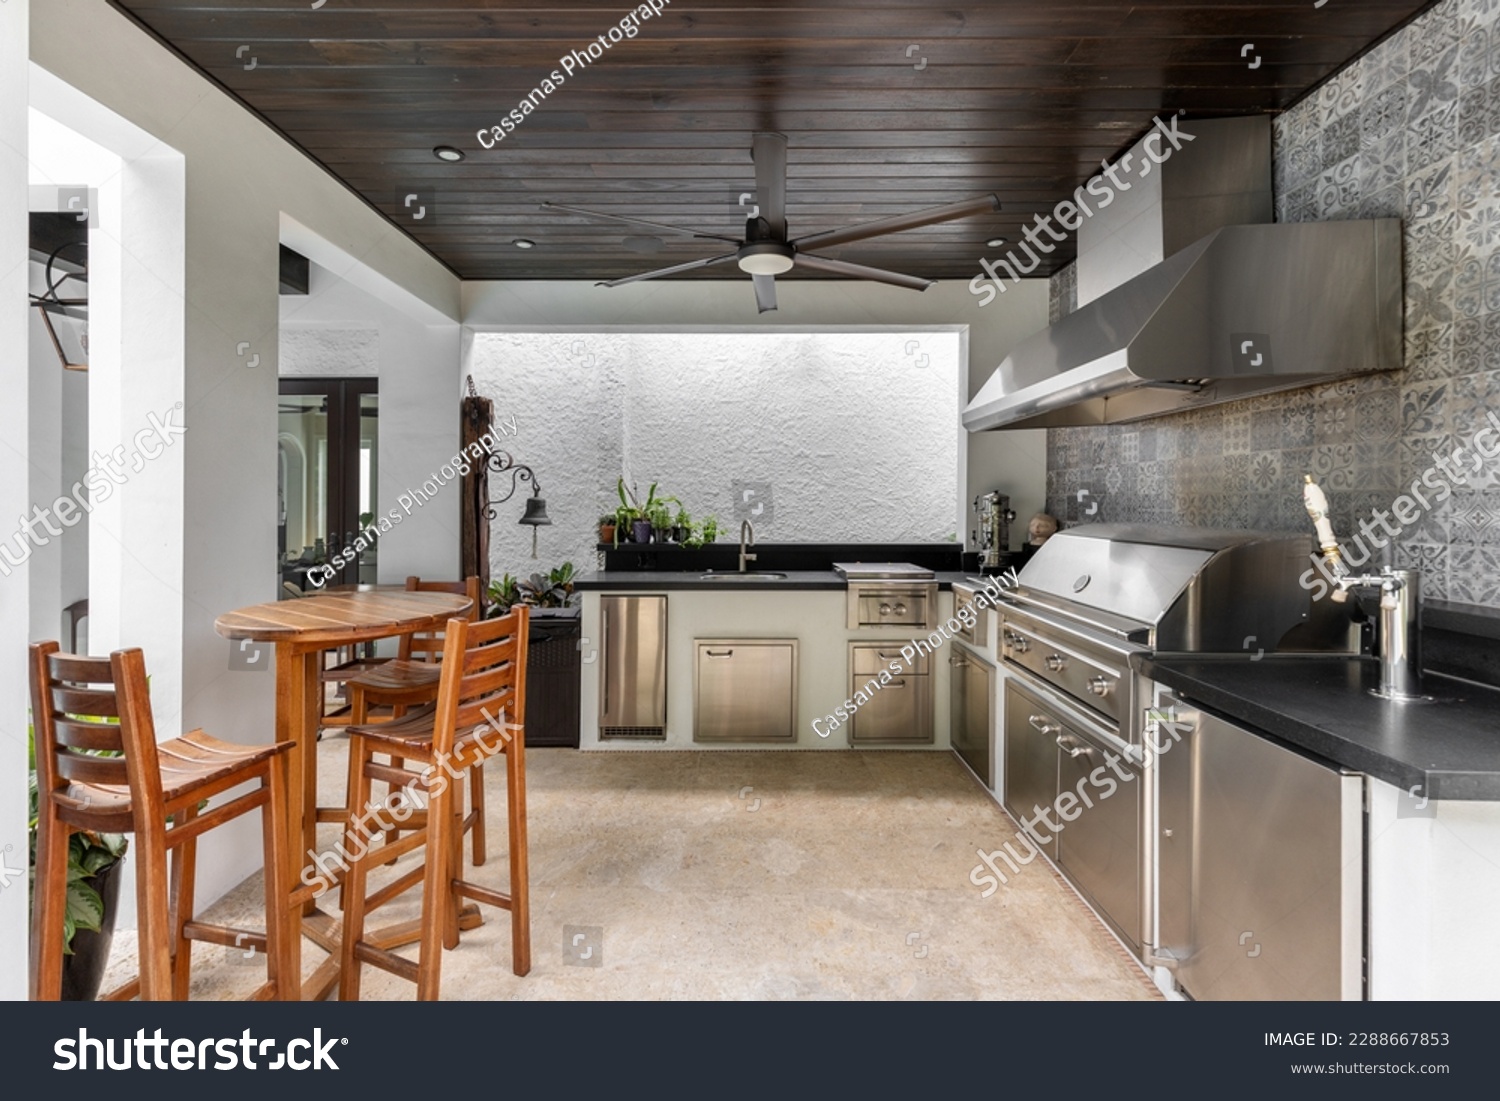 Modern outdoor kitchen and. luxury with grill, stove, extractor hood, wooden ceiling with fan, wooden tables and benches, chop tap, tiled wall.
Located in Coral Gables, Miami, FL, USA #2288667853